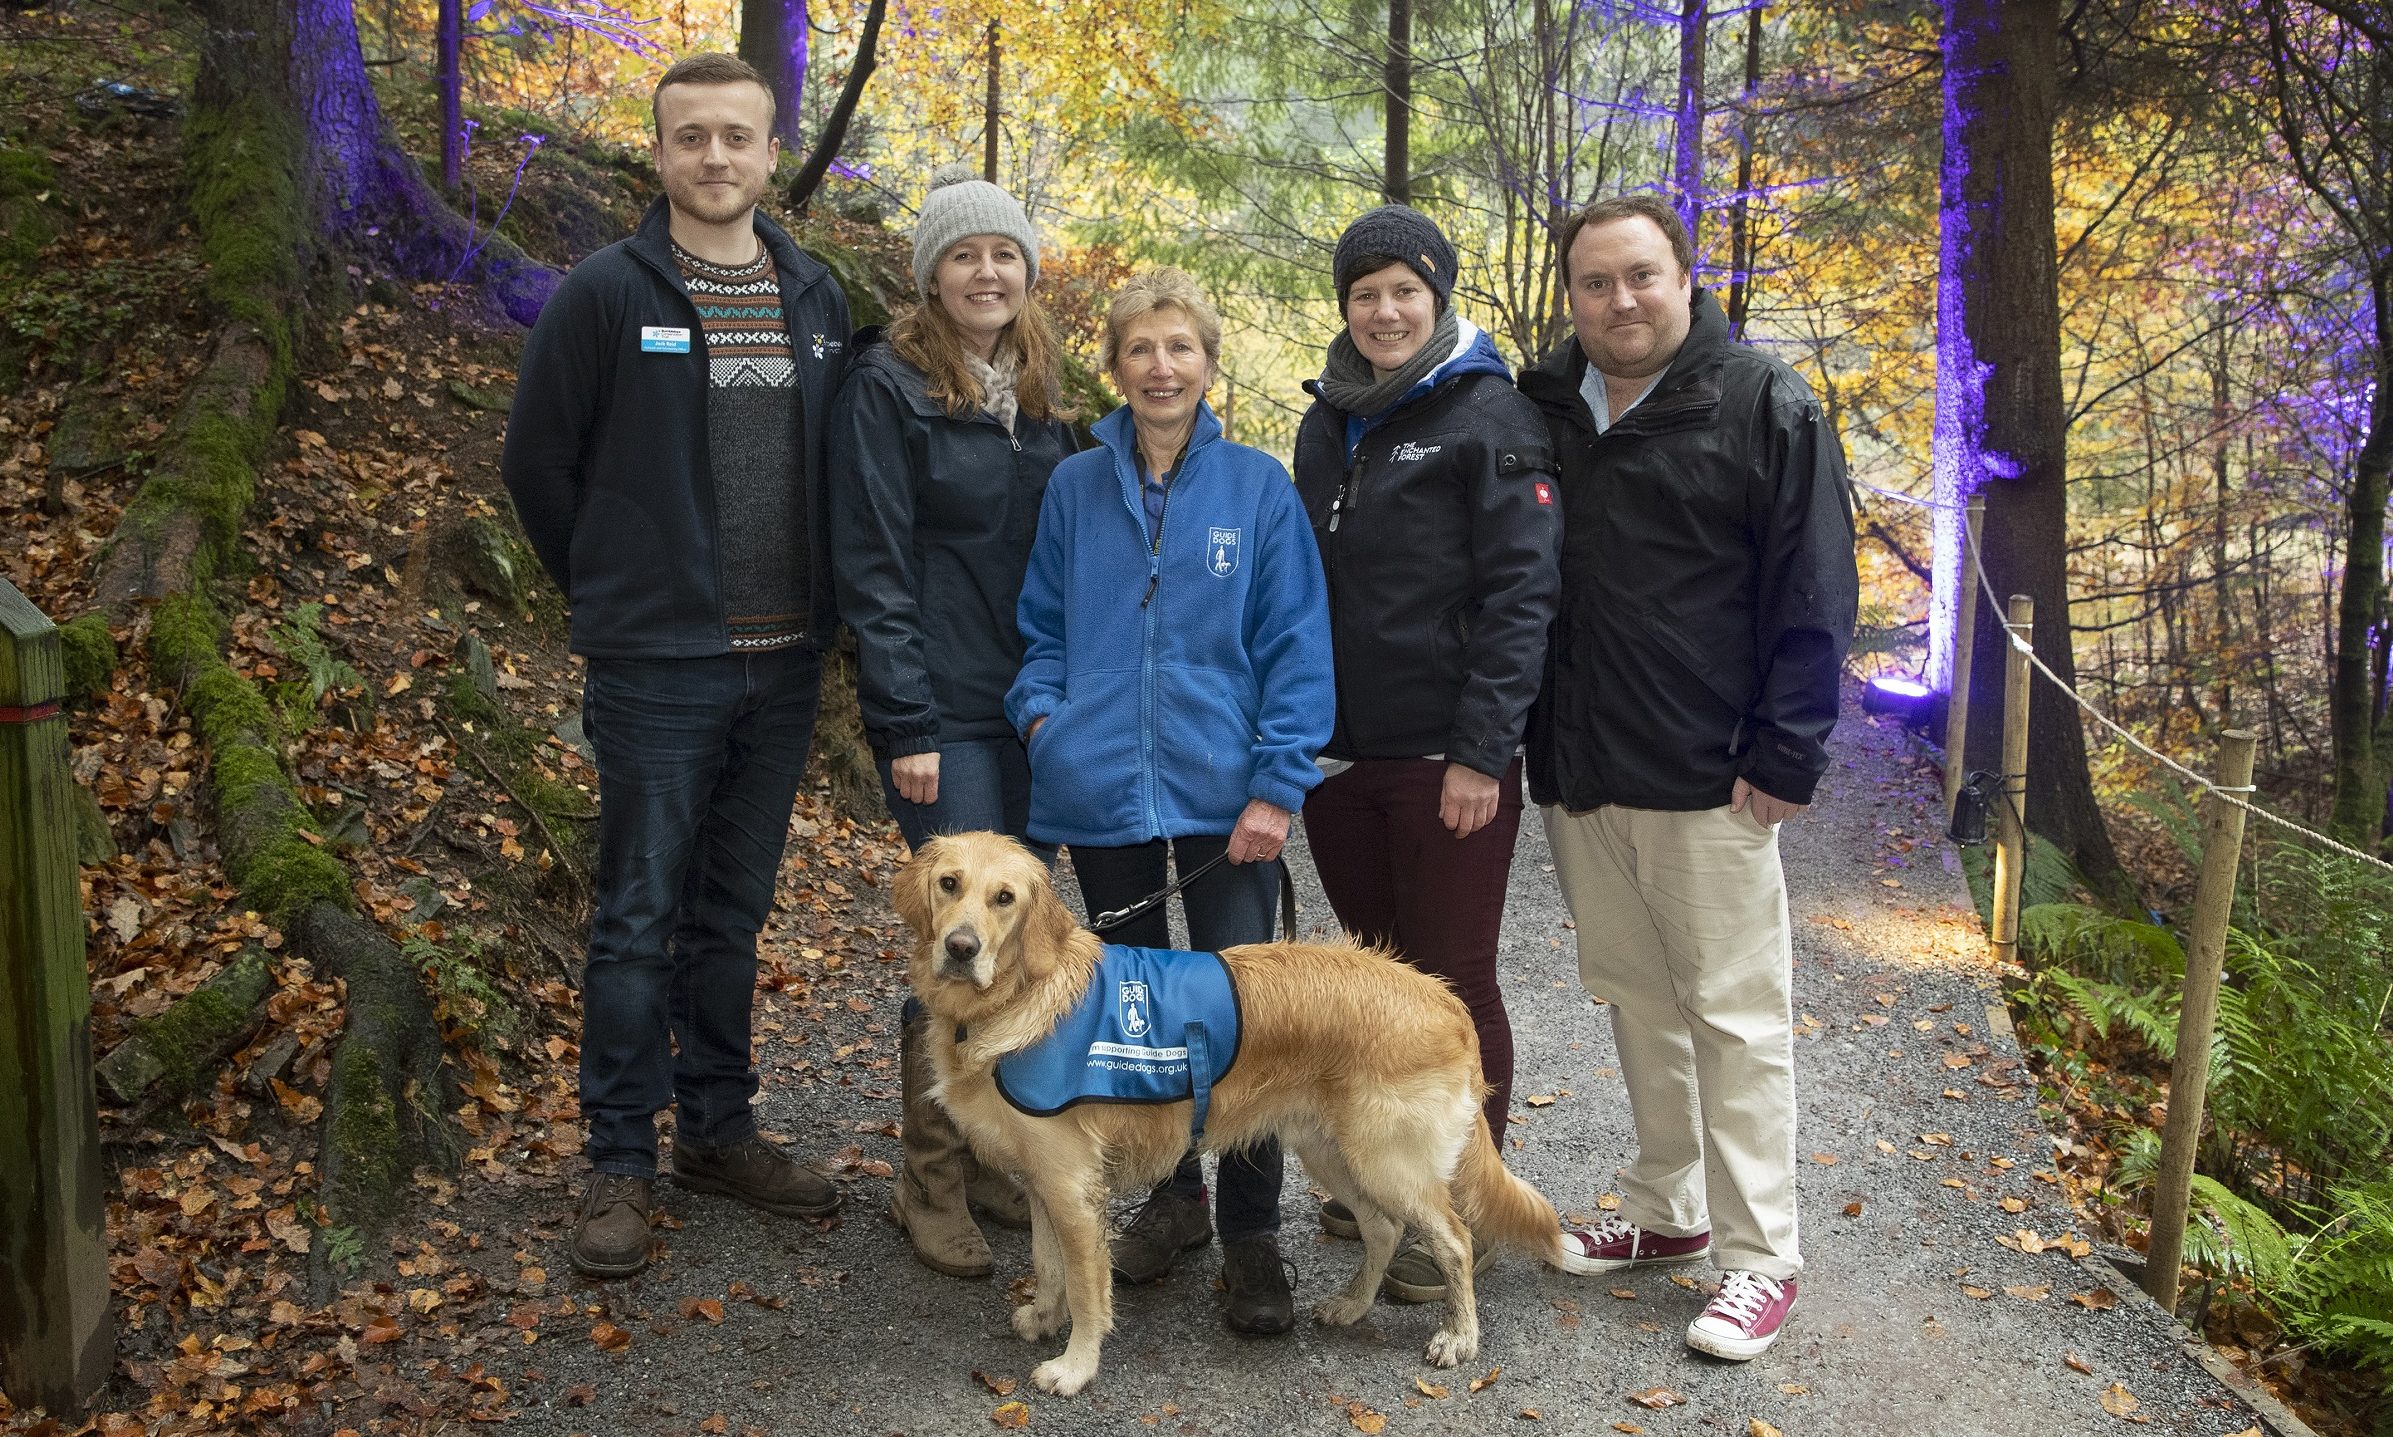 From left, Jack Reid from Bumblebee Conservation Trust, Alison Walker Trustee of The Enchanted Forest, Heather Walker and Blue from Guide Dogs, Enchanted Forest creative producer Zoë Squair and Graham Illsley from PKAVS.